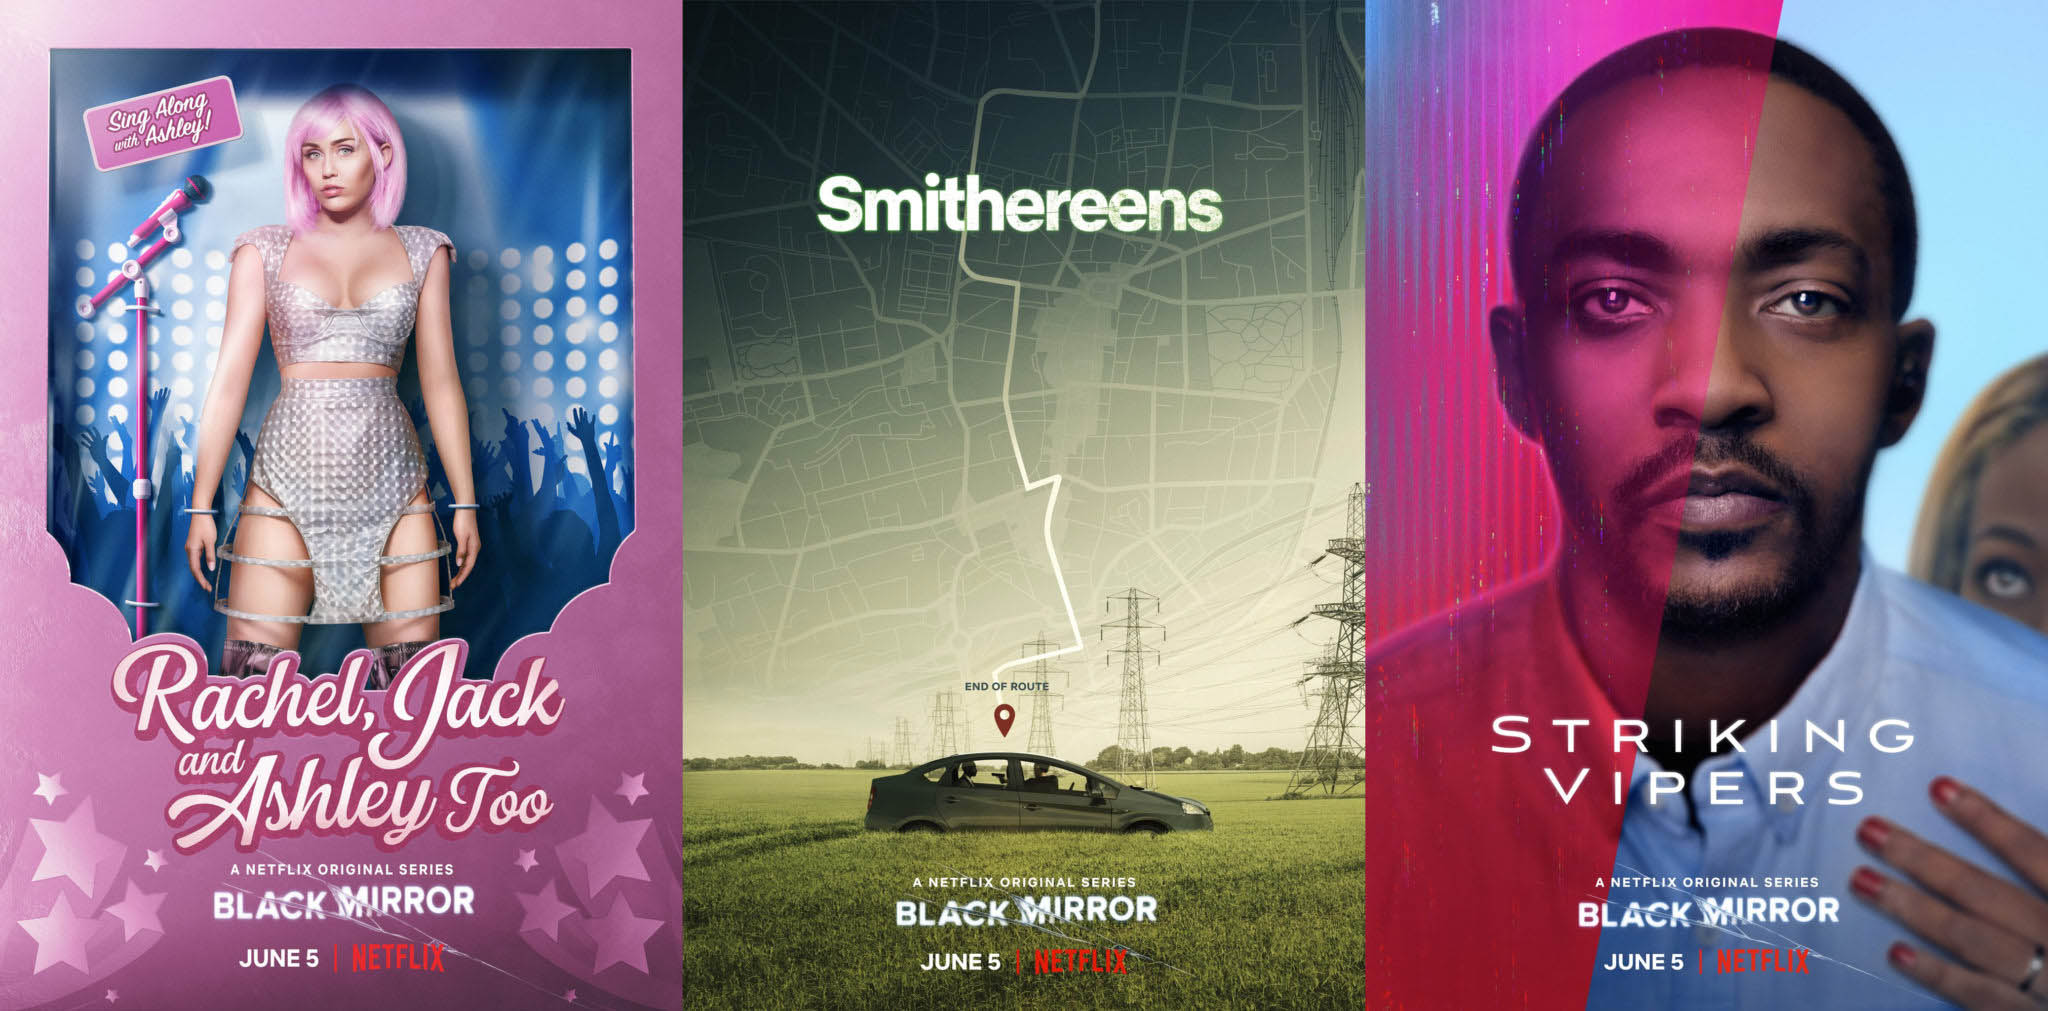 Black Mirror Season 5 Netflix 2019. This sci-fi anthology series explores a twisted, high-tech near-future where humanity's greatest innovations and darkest instincts collide.